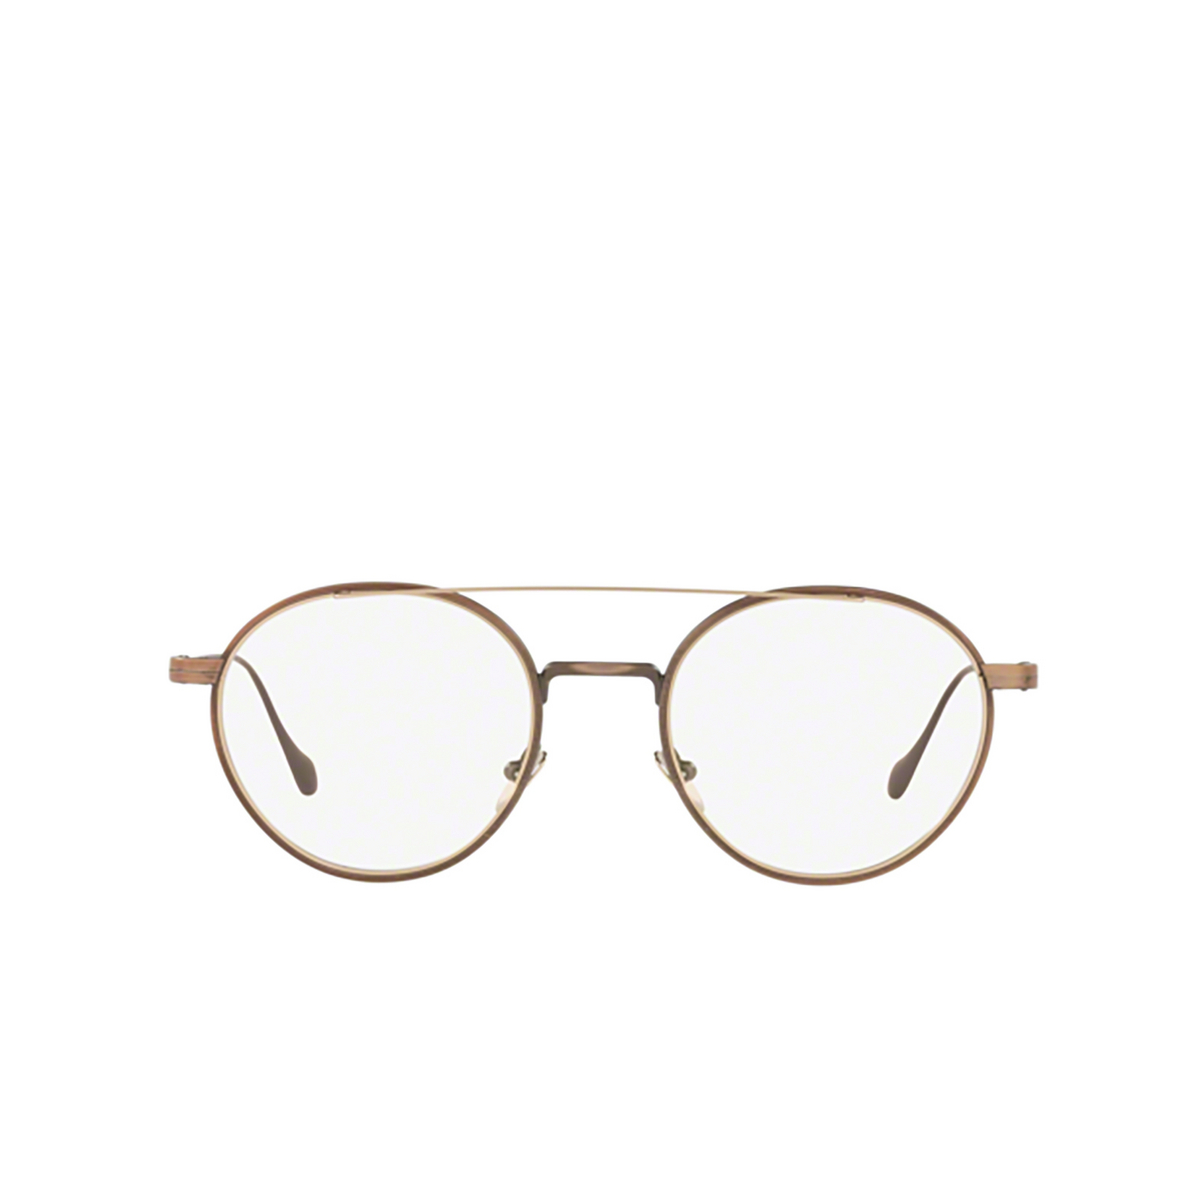 Giorgio Armani AR5089 Eyeglasses 3259 BRUSHED BRONZE / MATTE PALE GOLD - front view